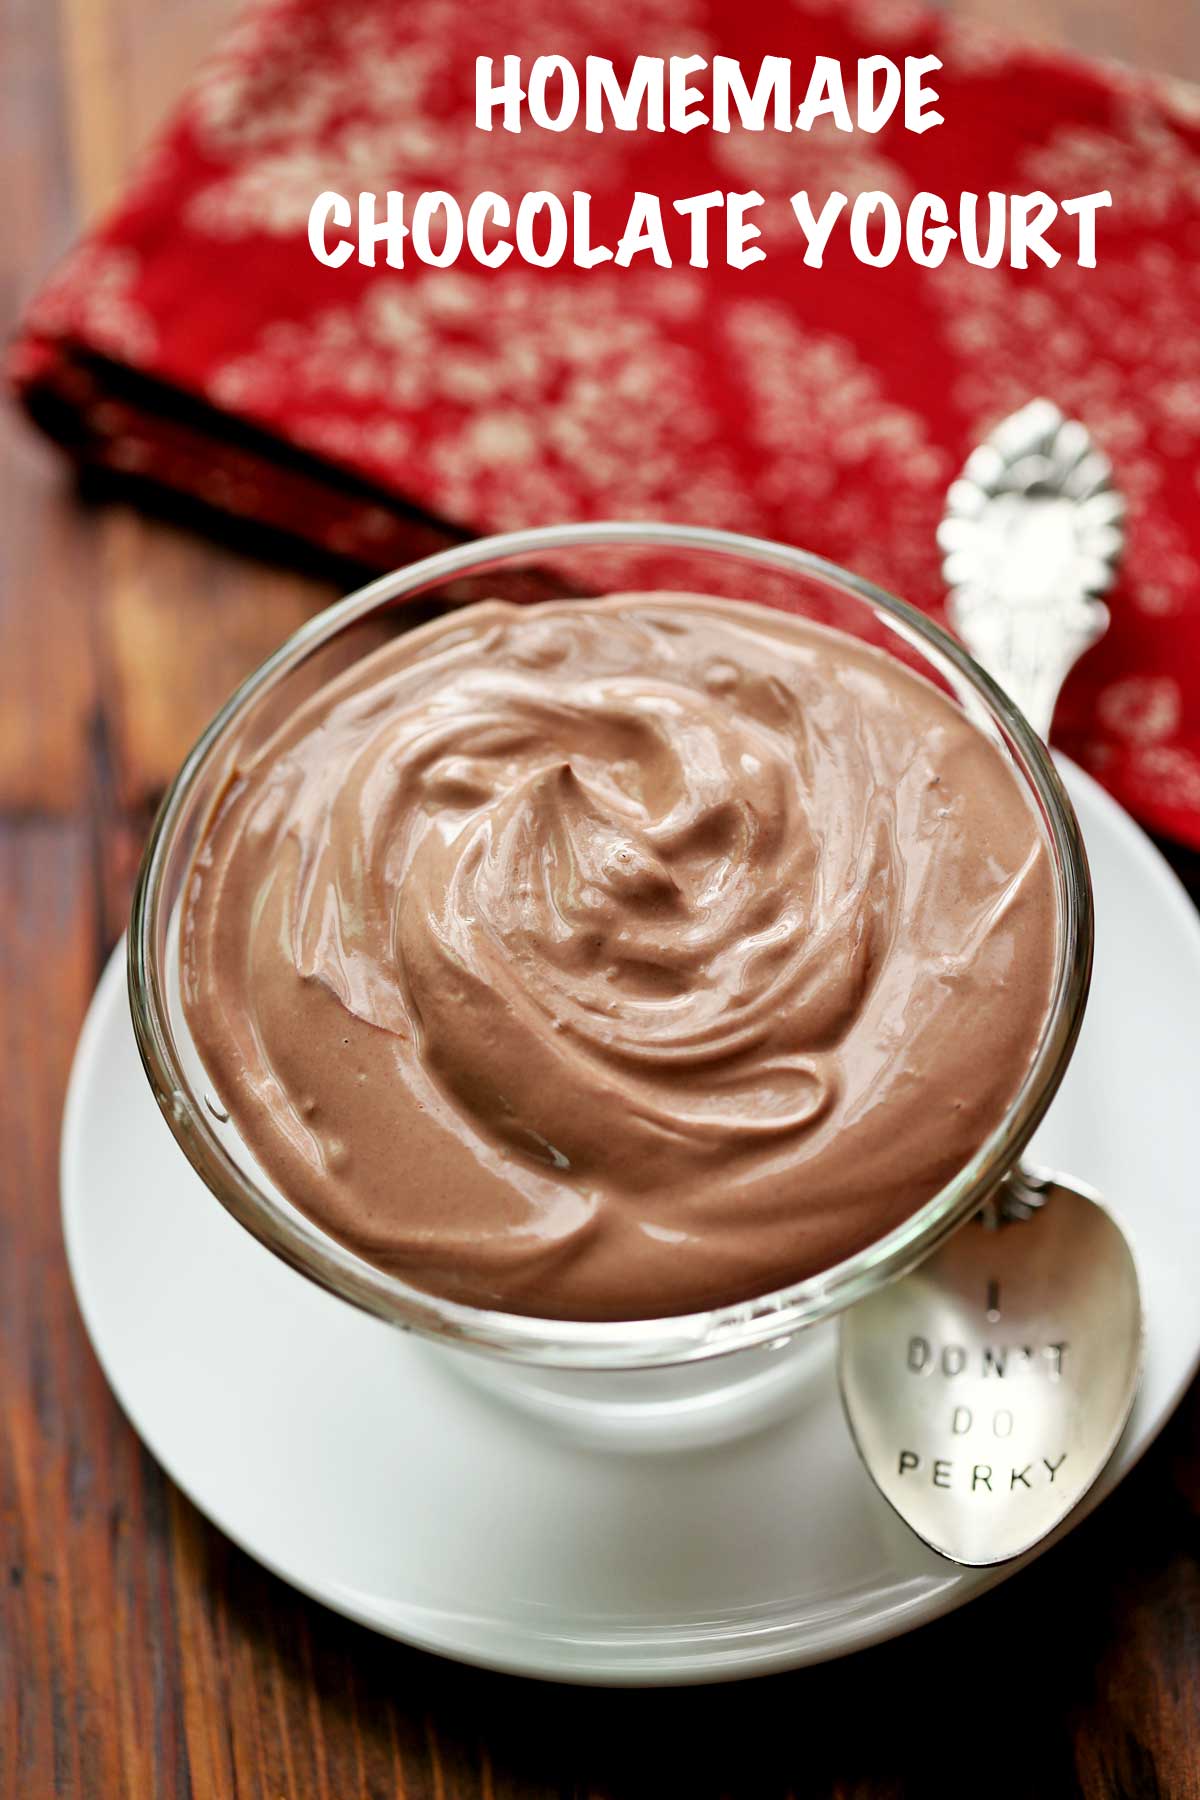 Use a spoon to scoop the chocolate yogurt into the bowl.